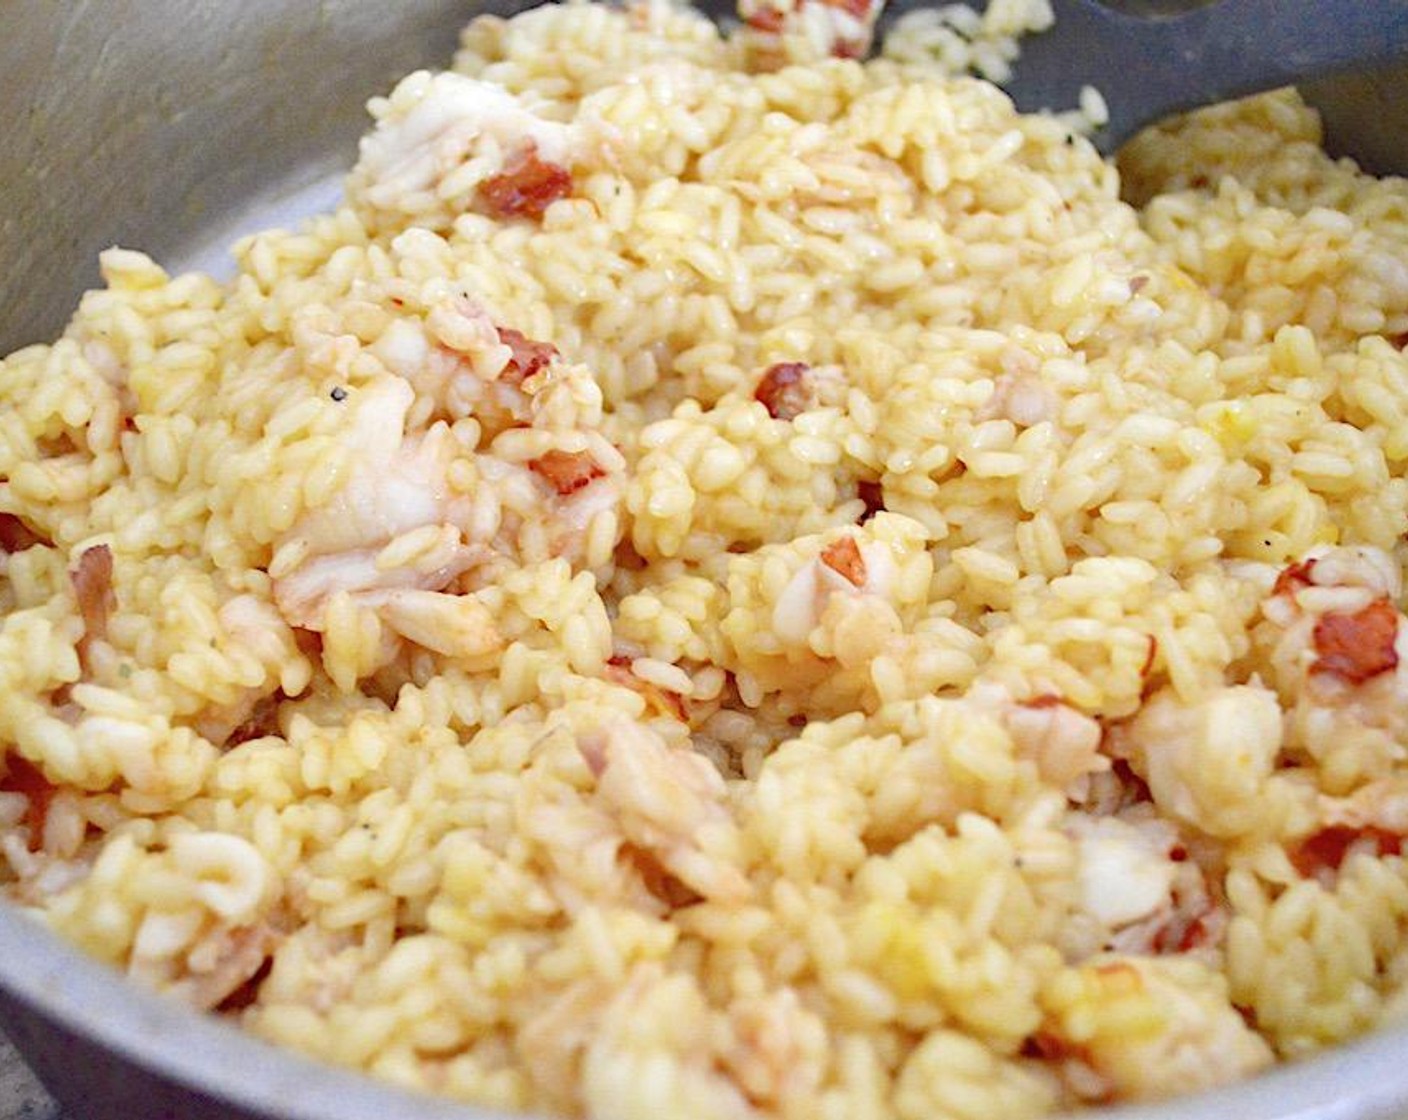 step 7 Repeat this 3 more times until the chicken stock is gone and is completely absorbed in the rice. Then add the lobster back in and stir it all well. Take the pan off of the heat and stir in the Asiago Cheese (2 Tbsp) until it is melted.